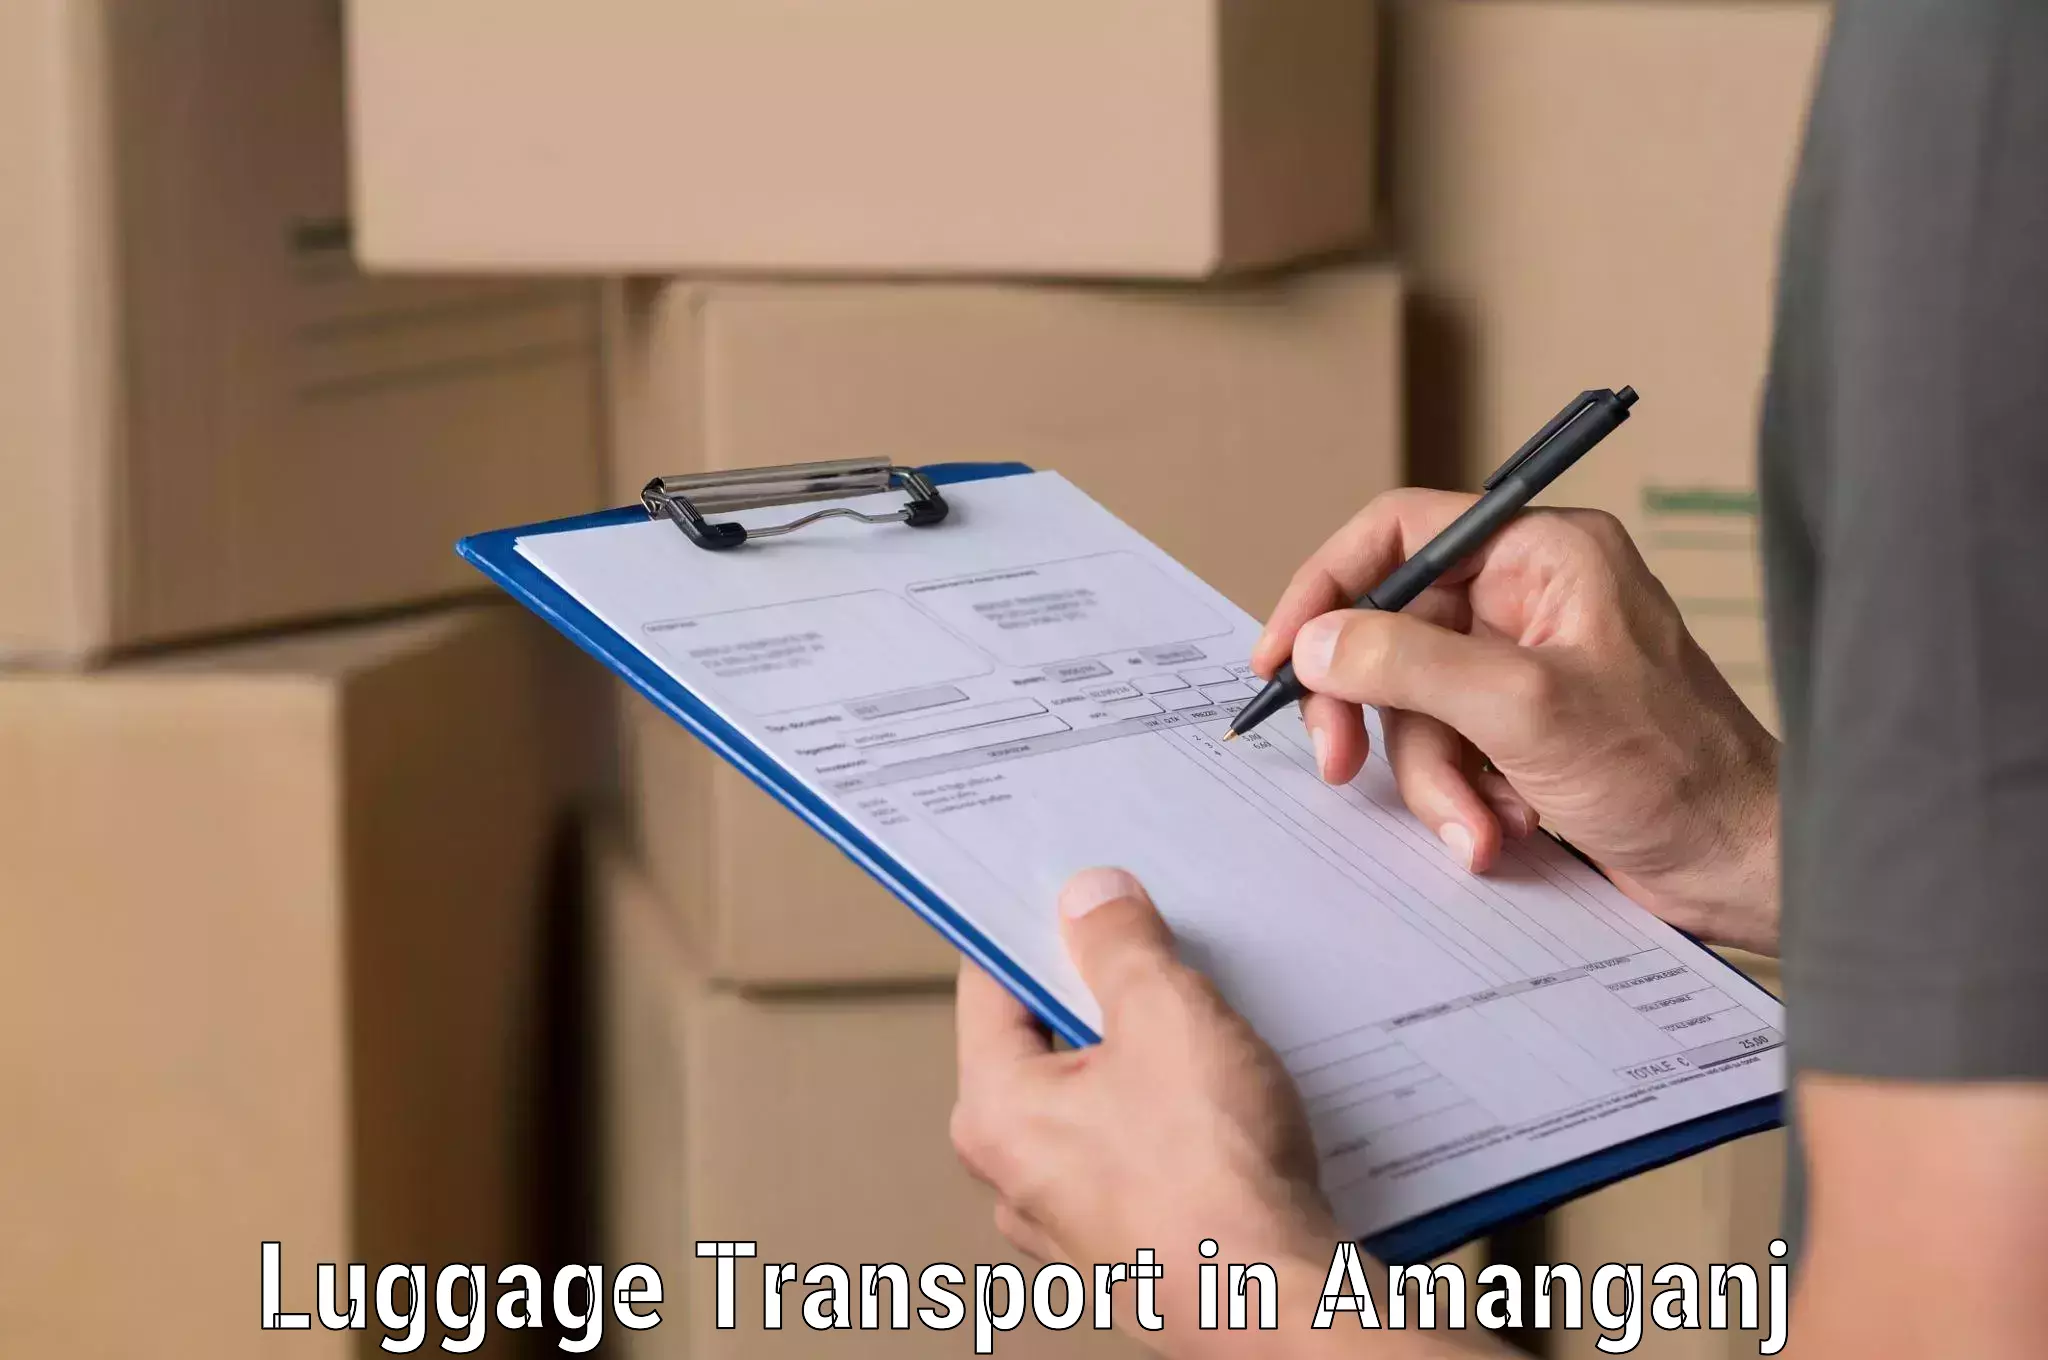 Luggage transport solutions in Amanganj